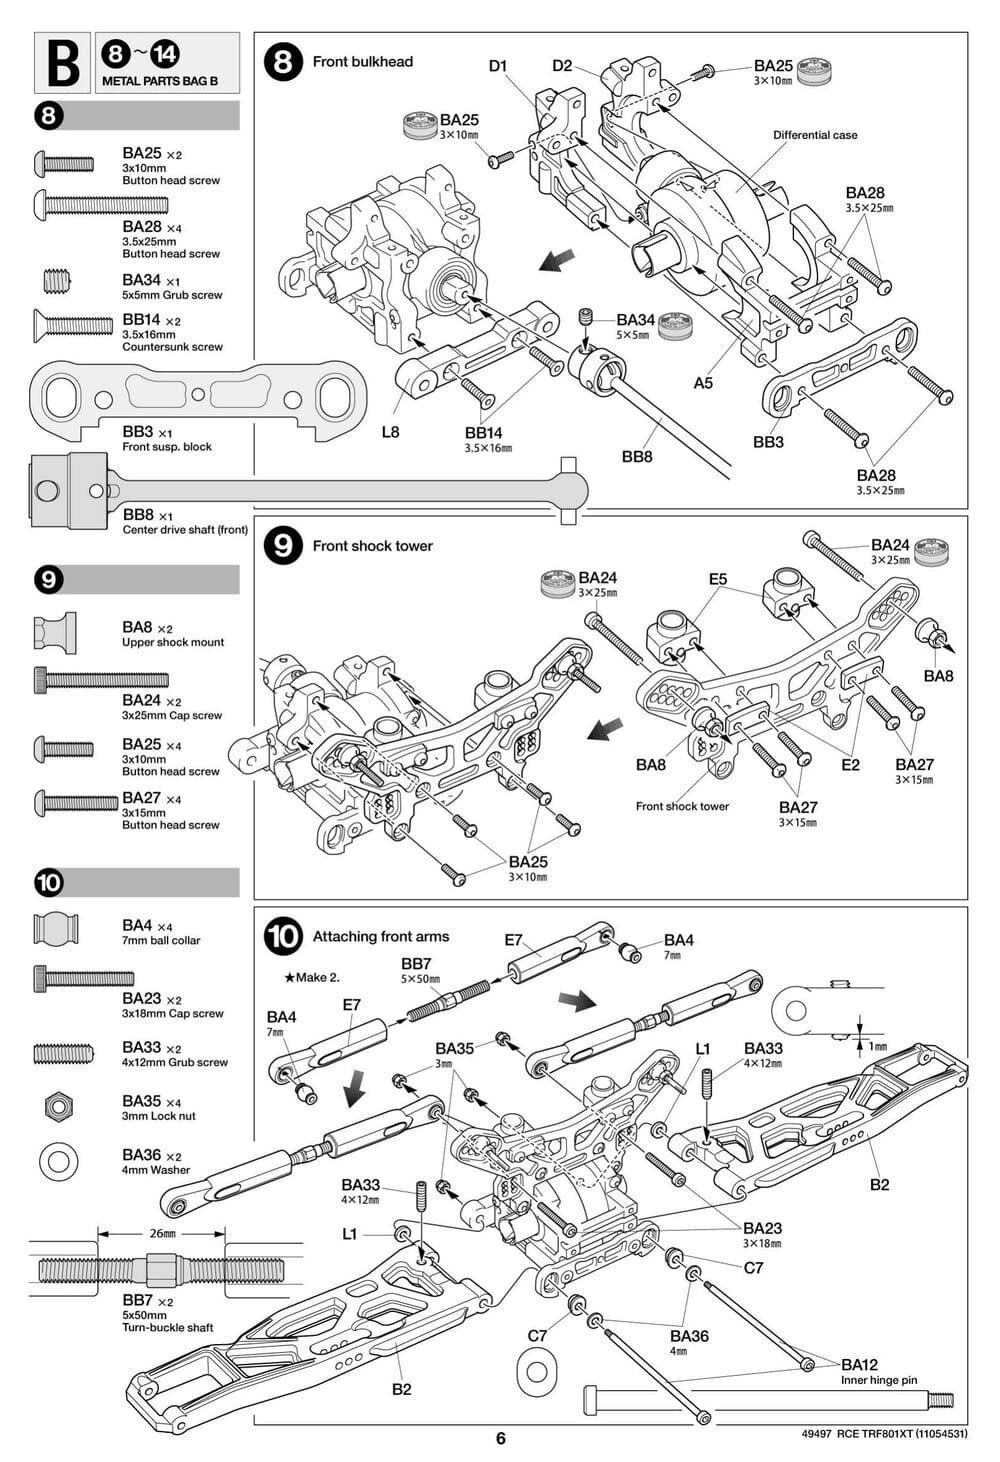 Tamiya - TRF801Xt Performance Package Version Chassis - Manual - Page 6